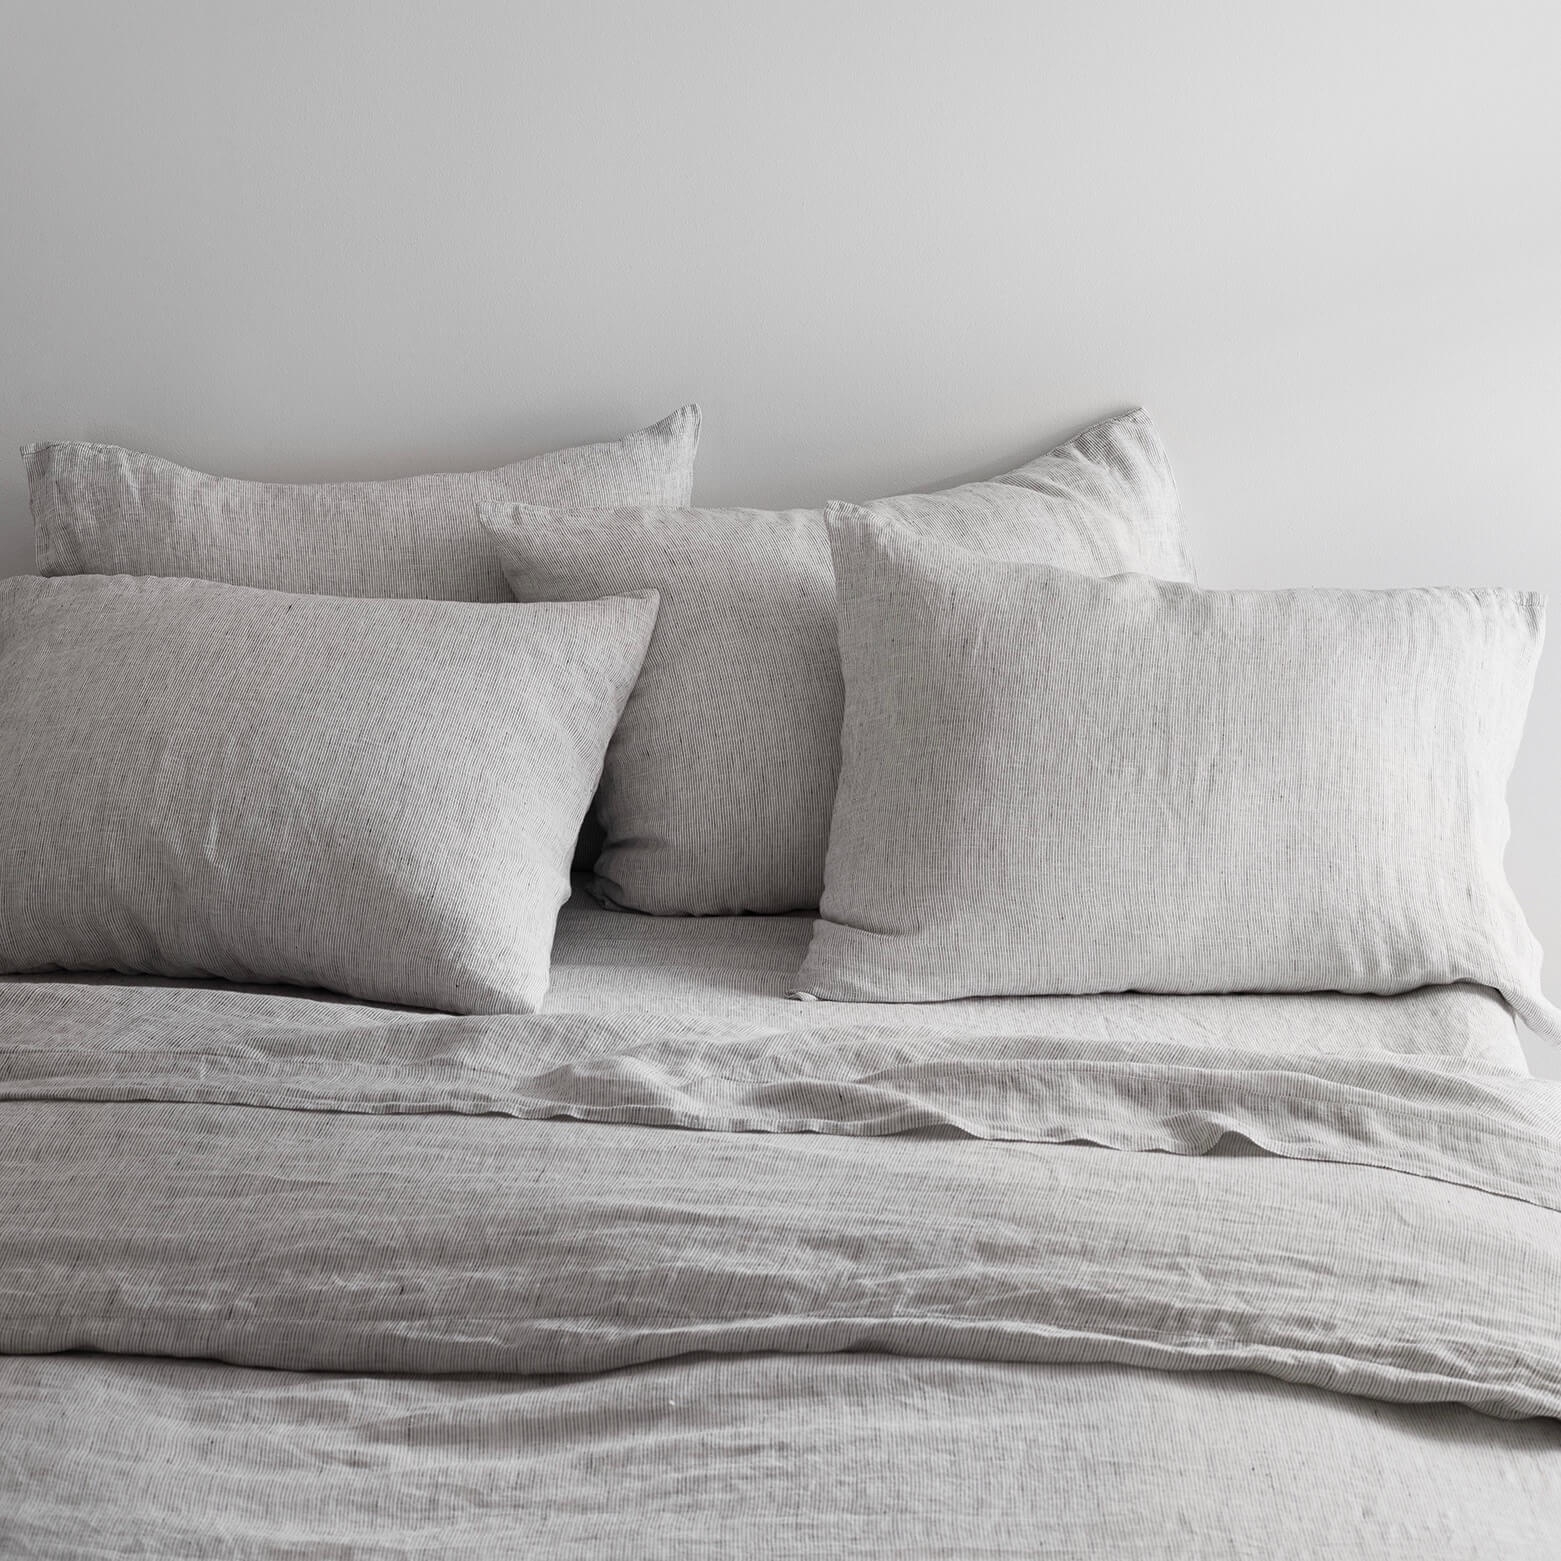 The Citizenry Stonewashed Linen Duvet Cover | Full/Queen | Duvet Only | Indigo Chambray - Image 3